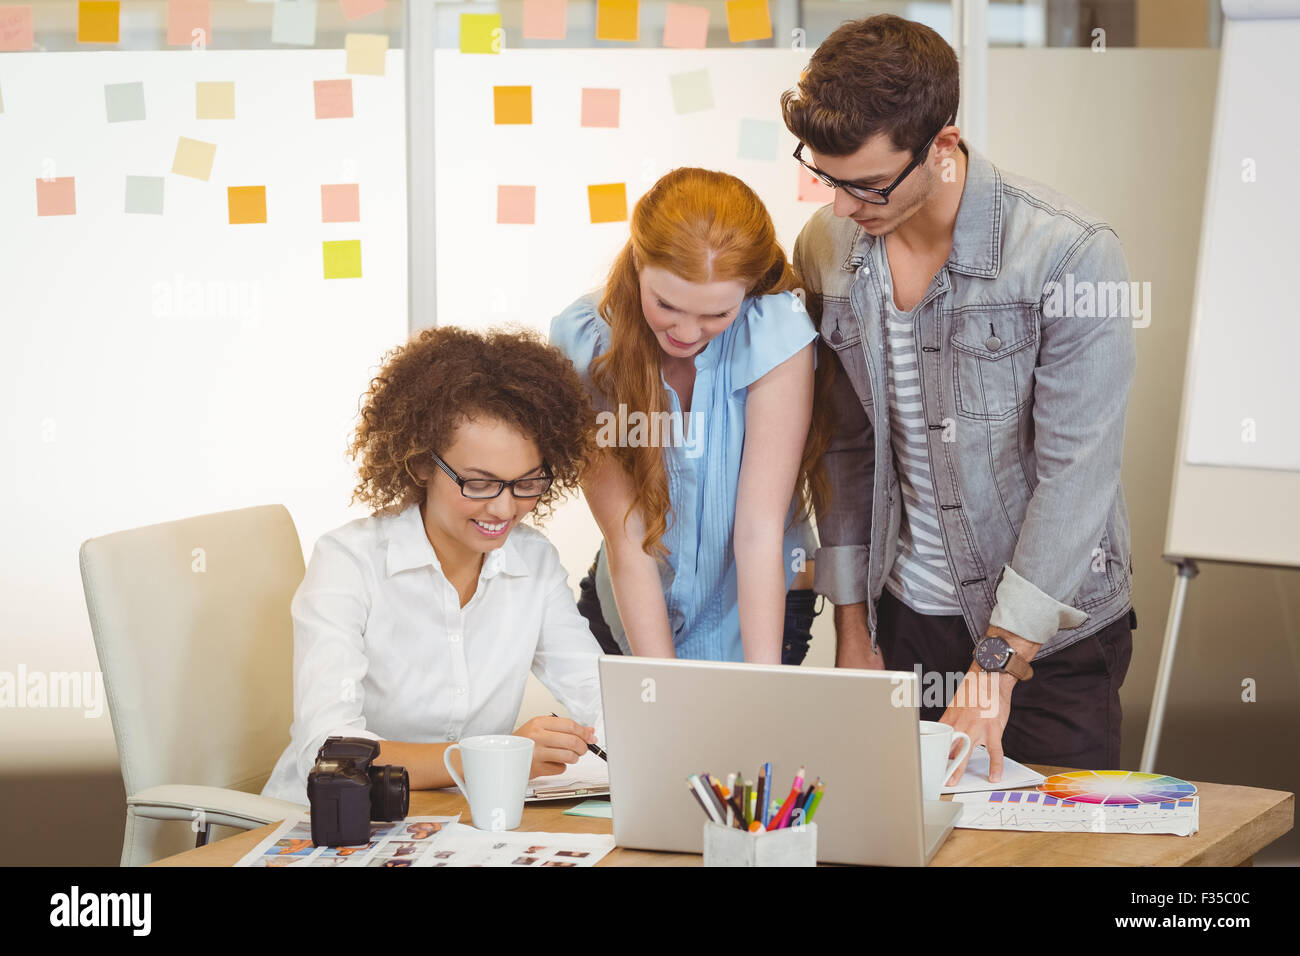 Smiling businesswoman with colleagues Stock Photo